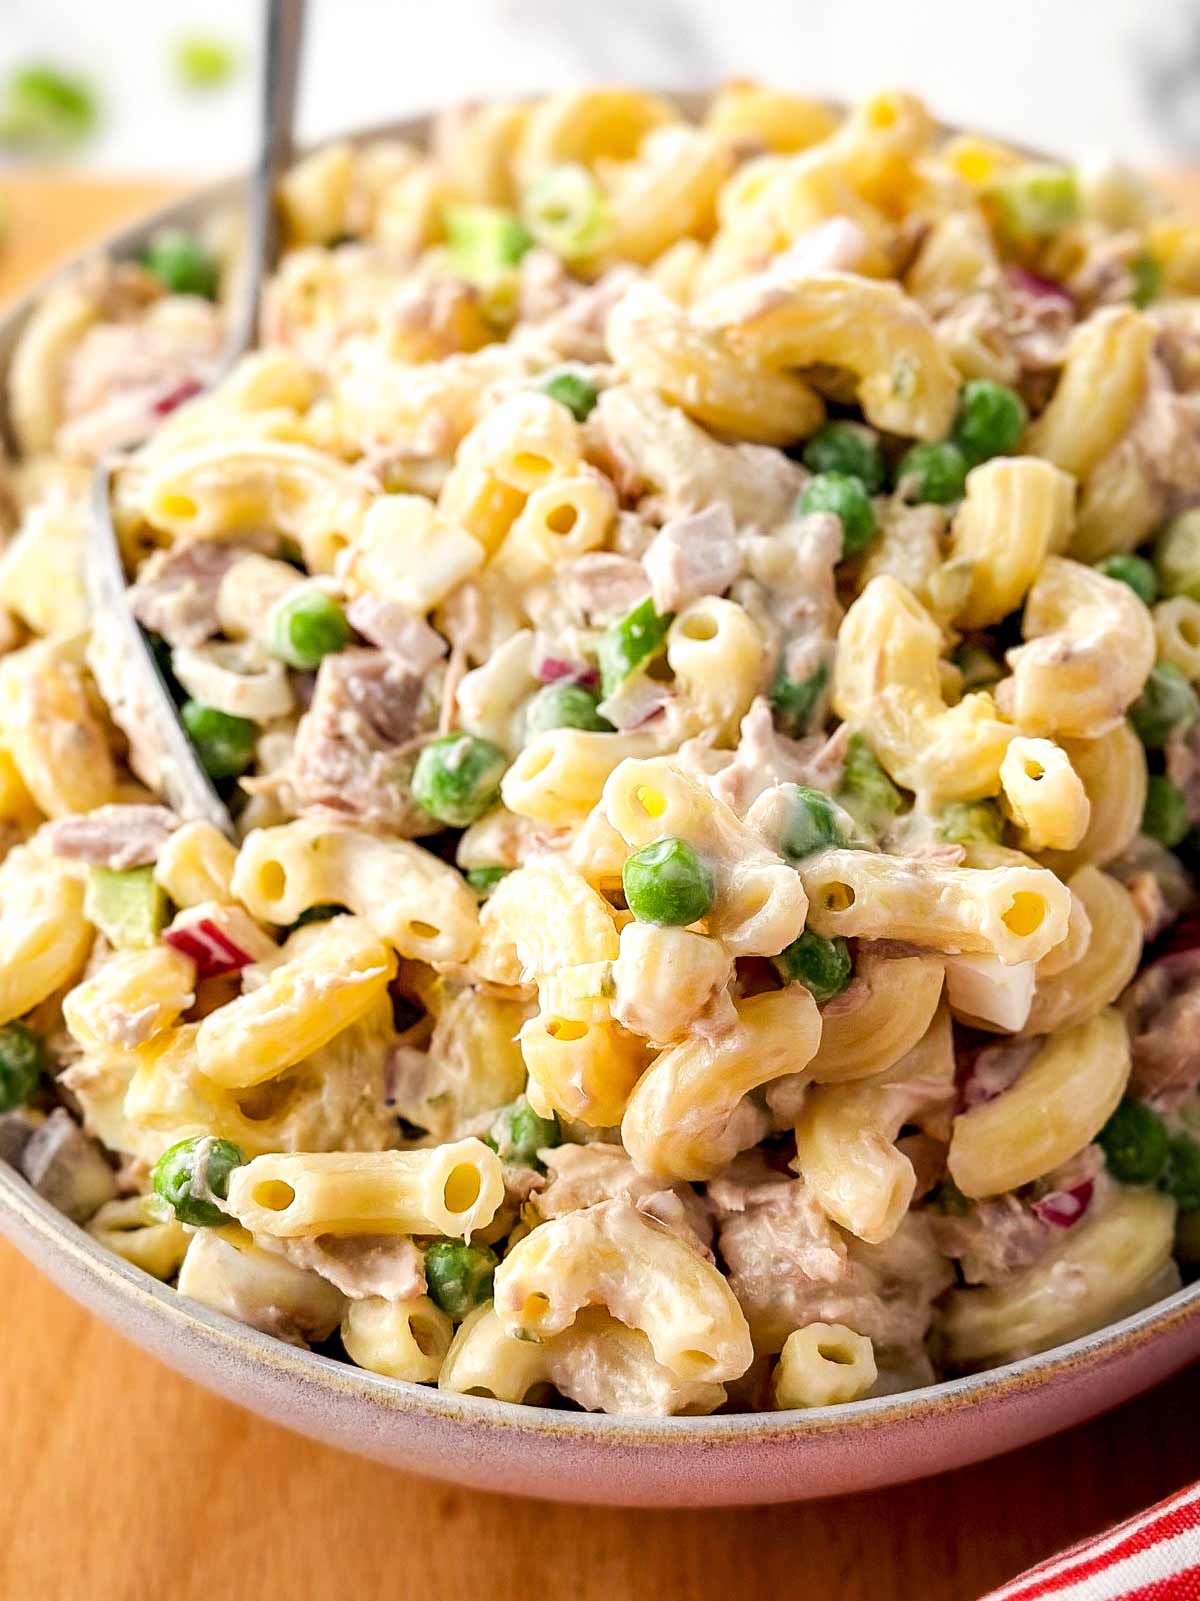 frontal view of bowl filled with tuna macaroni salad